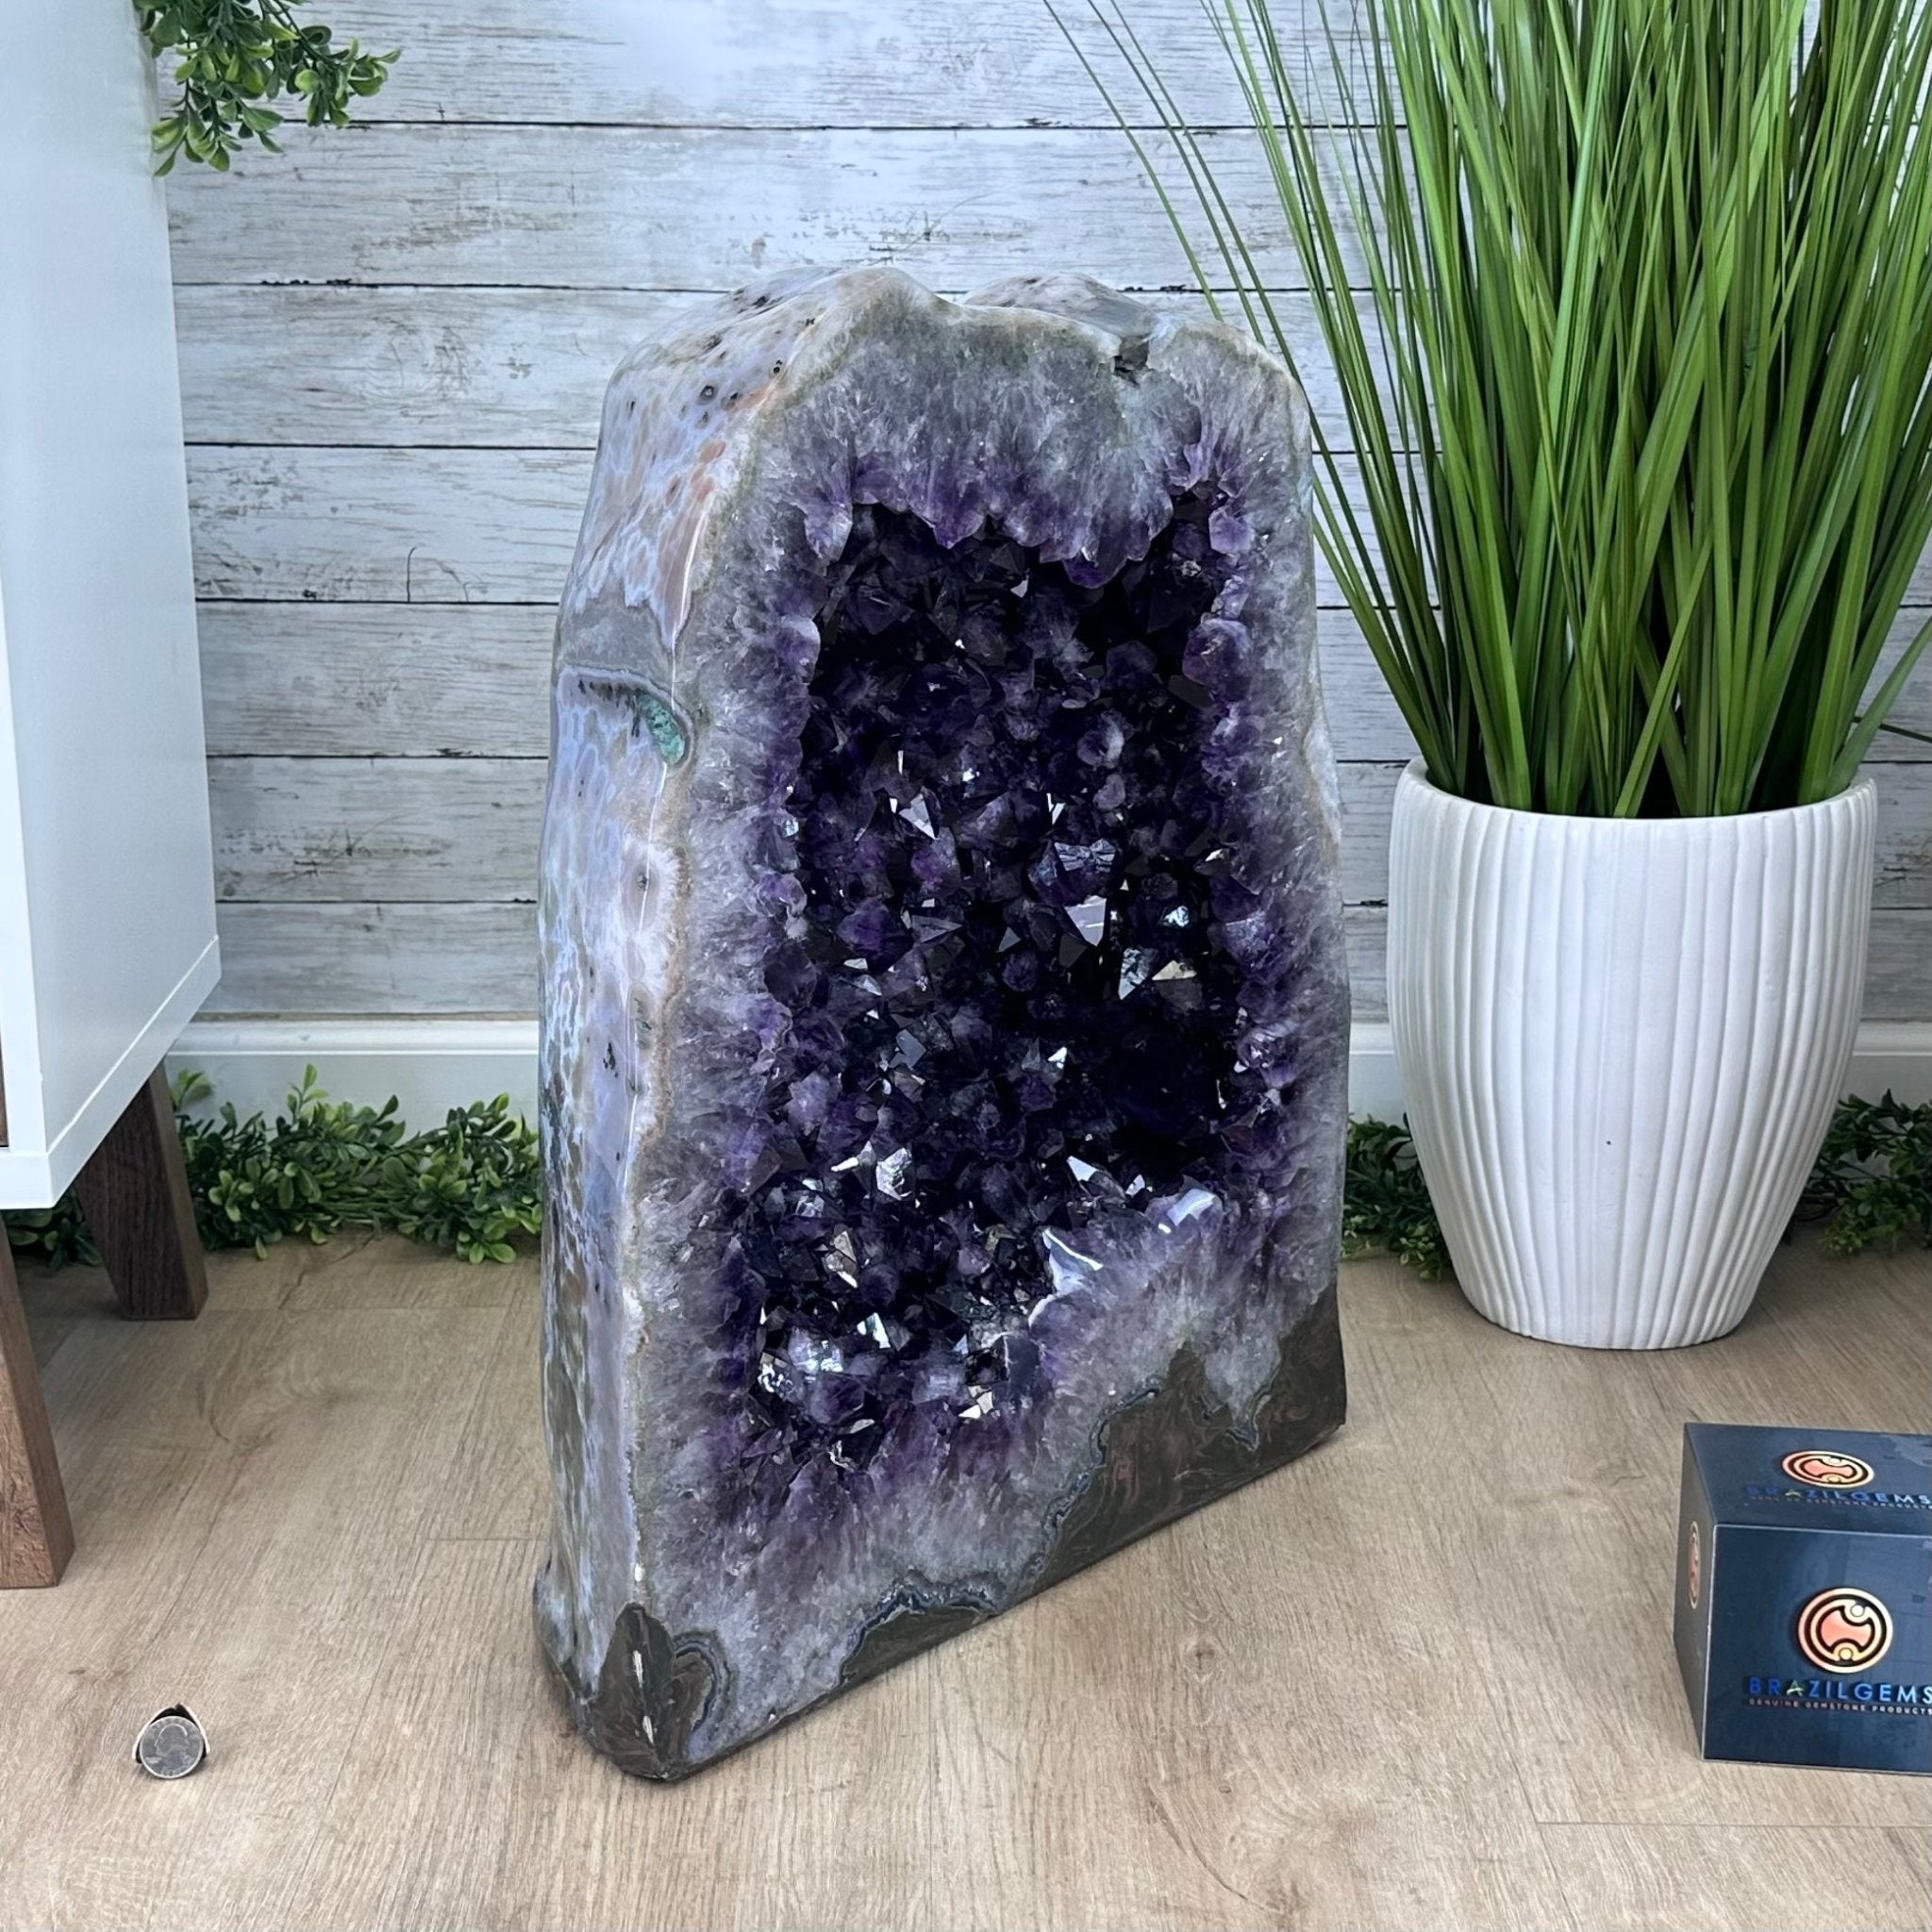 Super Quality Polished Brazilian Amethyst Cathedral, 161.6 lbs & 21.25" tall Model #5602-0072 by Brazil Gems - Brazil GemsBrazil GemsSuper Quality Polished Brazilian Amethyst Cathedral, 161.6 lbs & 21.25" tall Model #5602-0072 by Brazil GemsPolished Cathedrals5602-0072